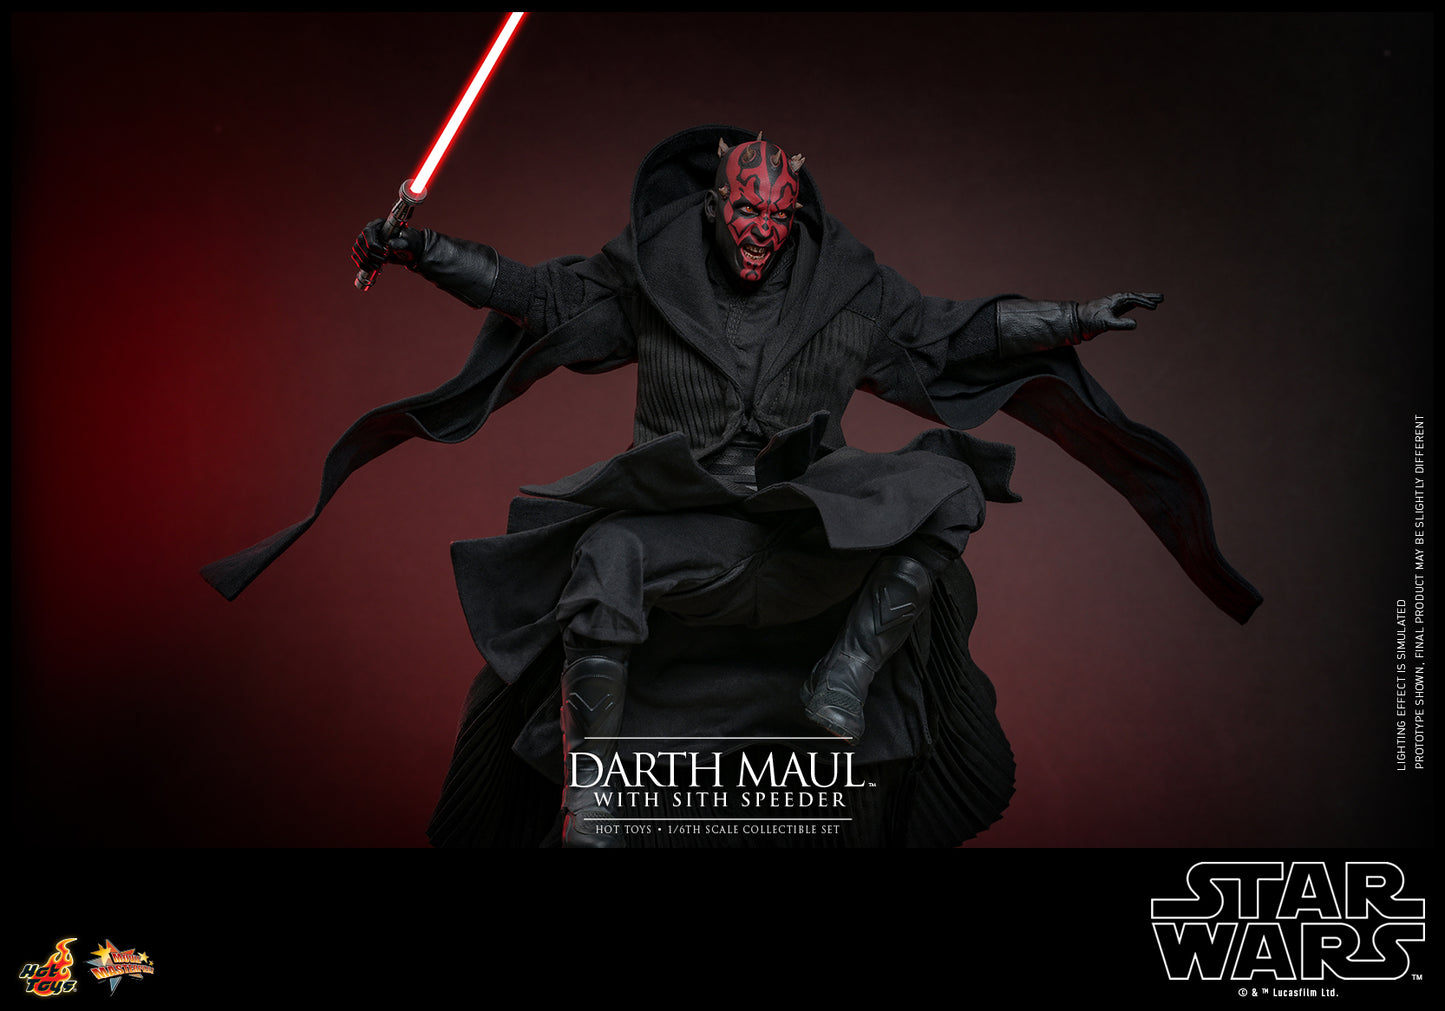 Star Wars Episode I: The Phantom Menace - Darth Maul with Sith Speeder 1:6 Scale Collectible Set